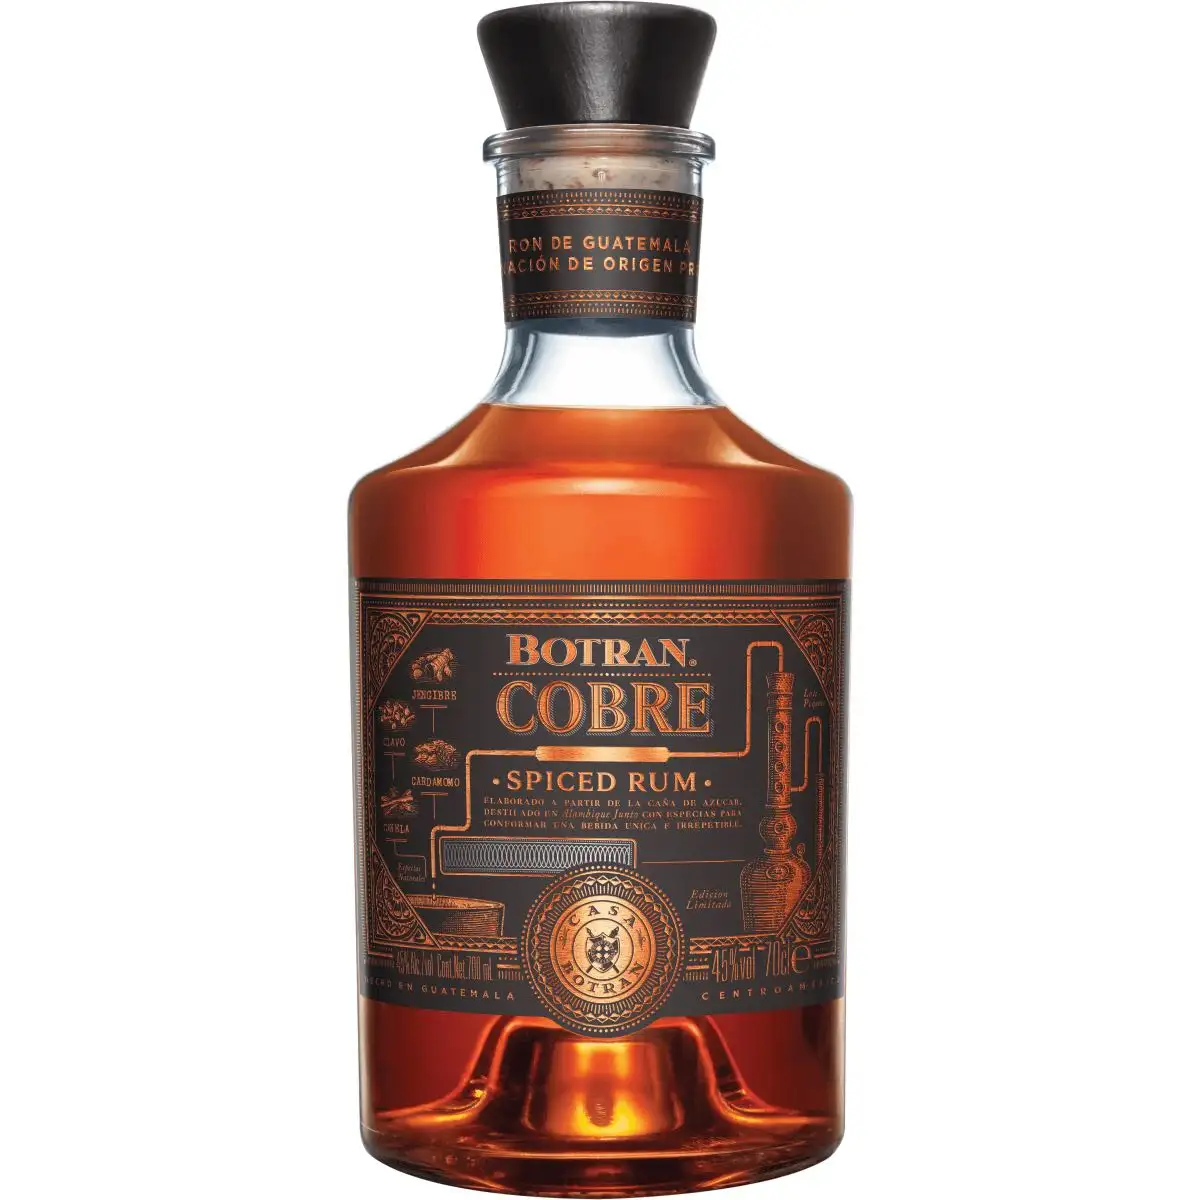 Image of the front of the bottle of the rum Botran Cobre